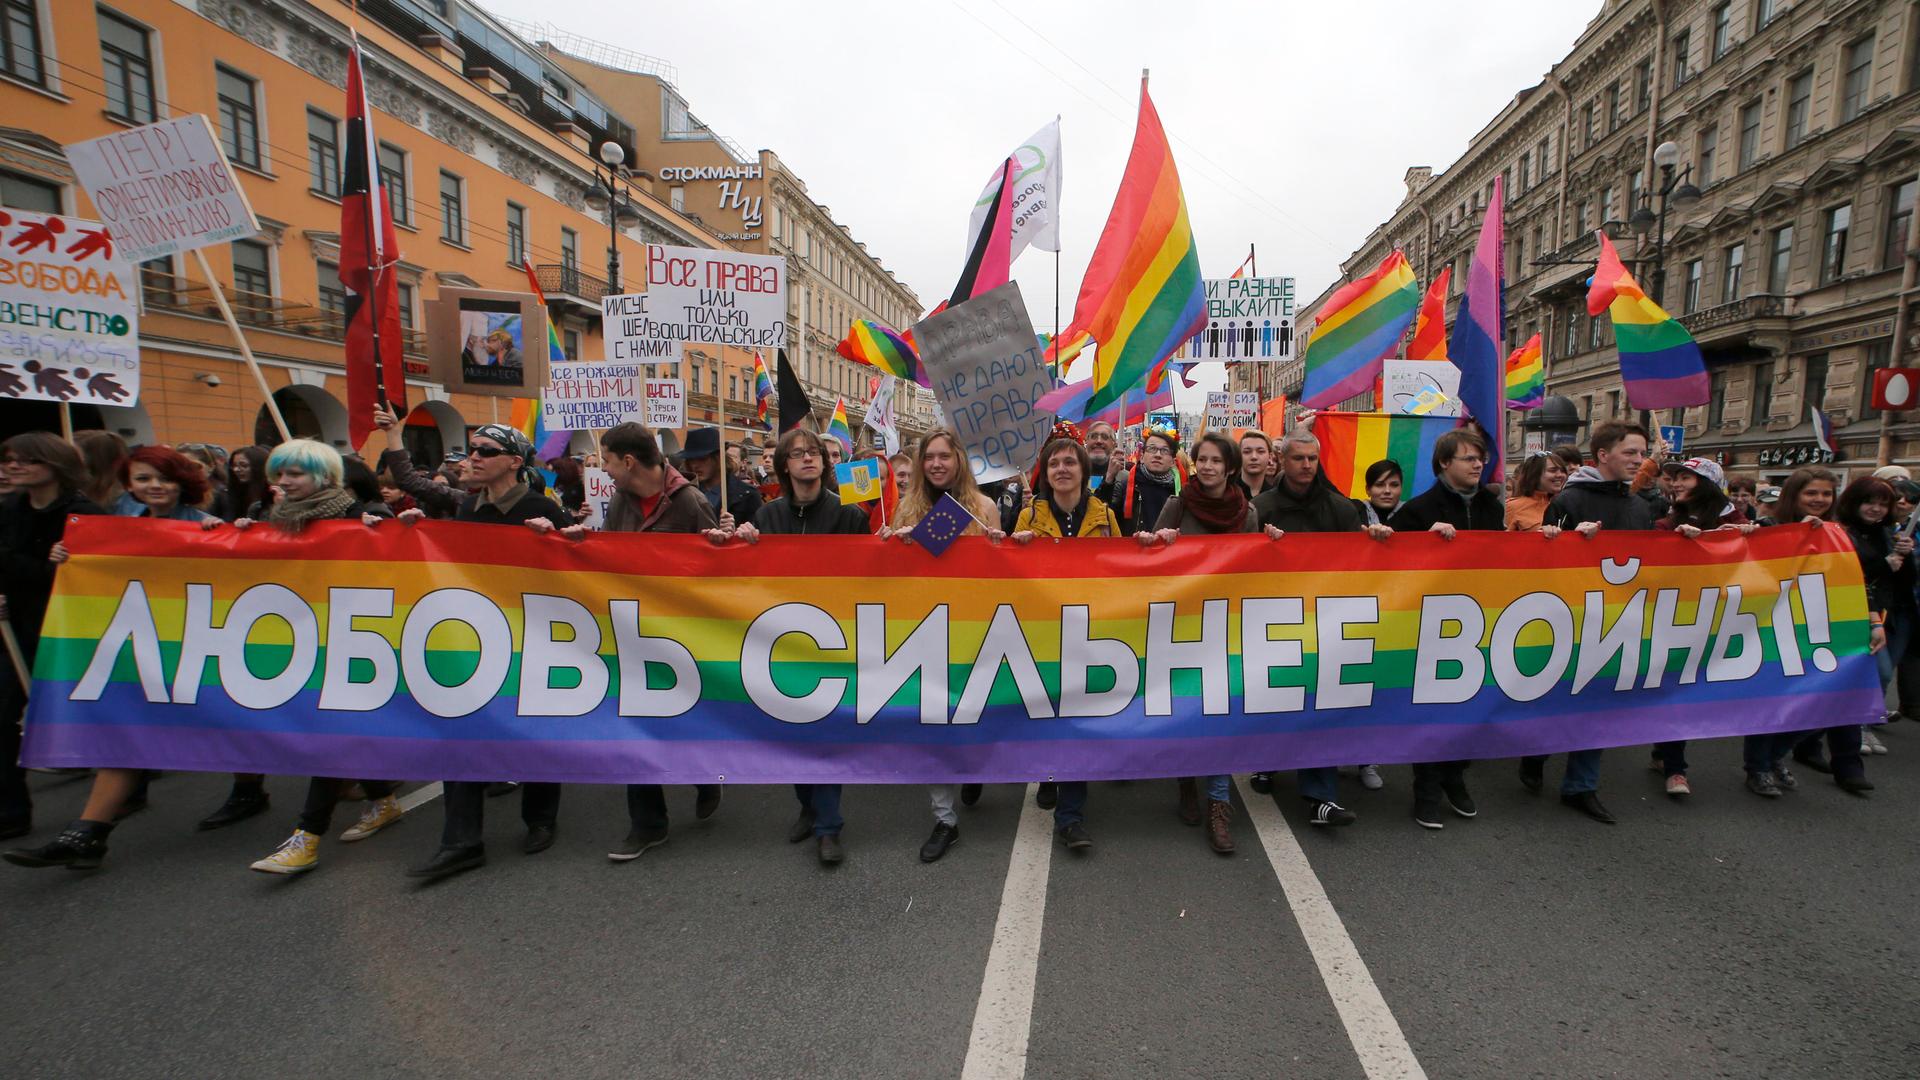 Gay rights activists march with a banner during a May Day rally in St. Petersburg. The banner reads, "Love is stronger than war!"